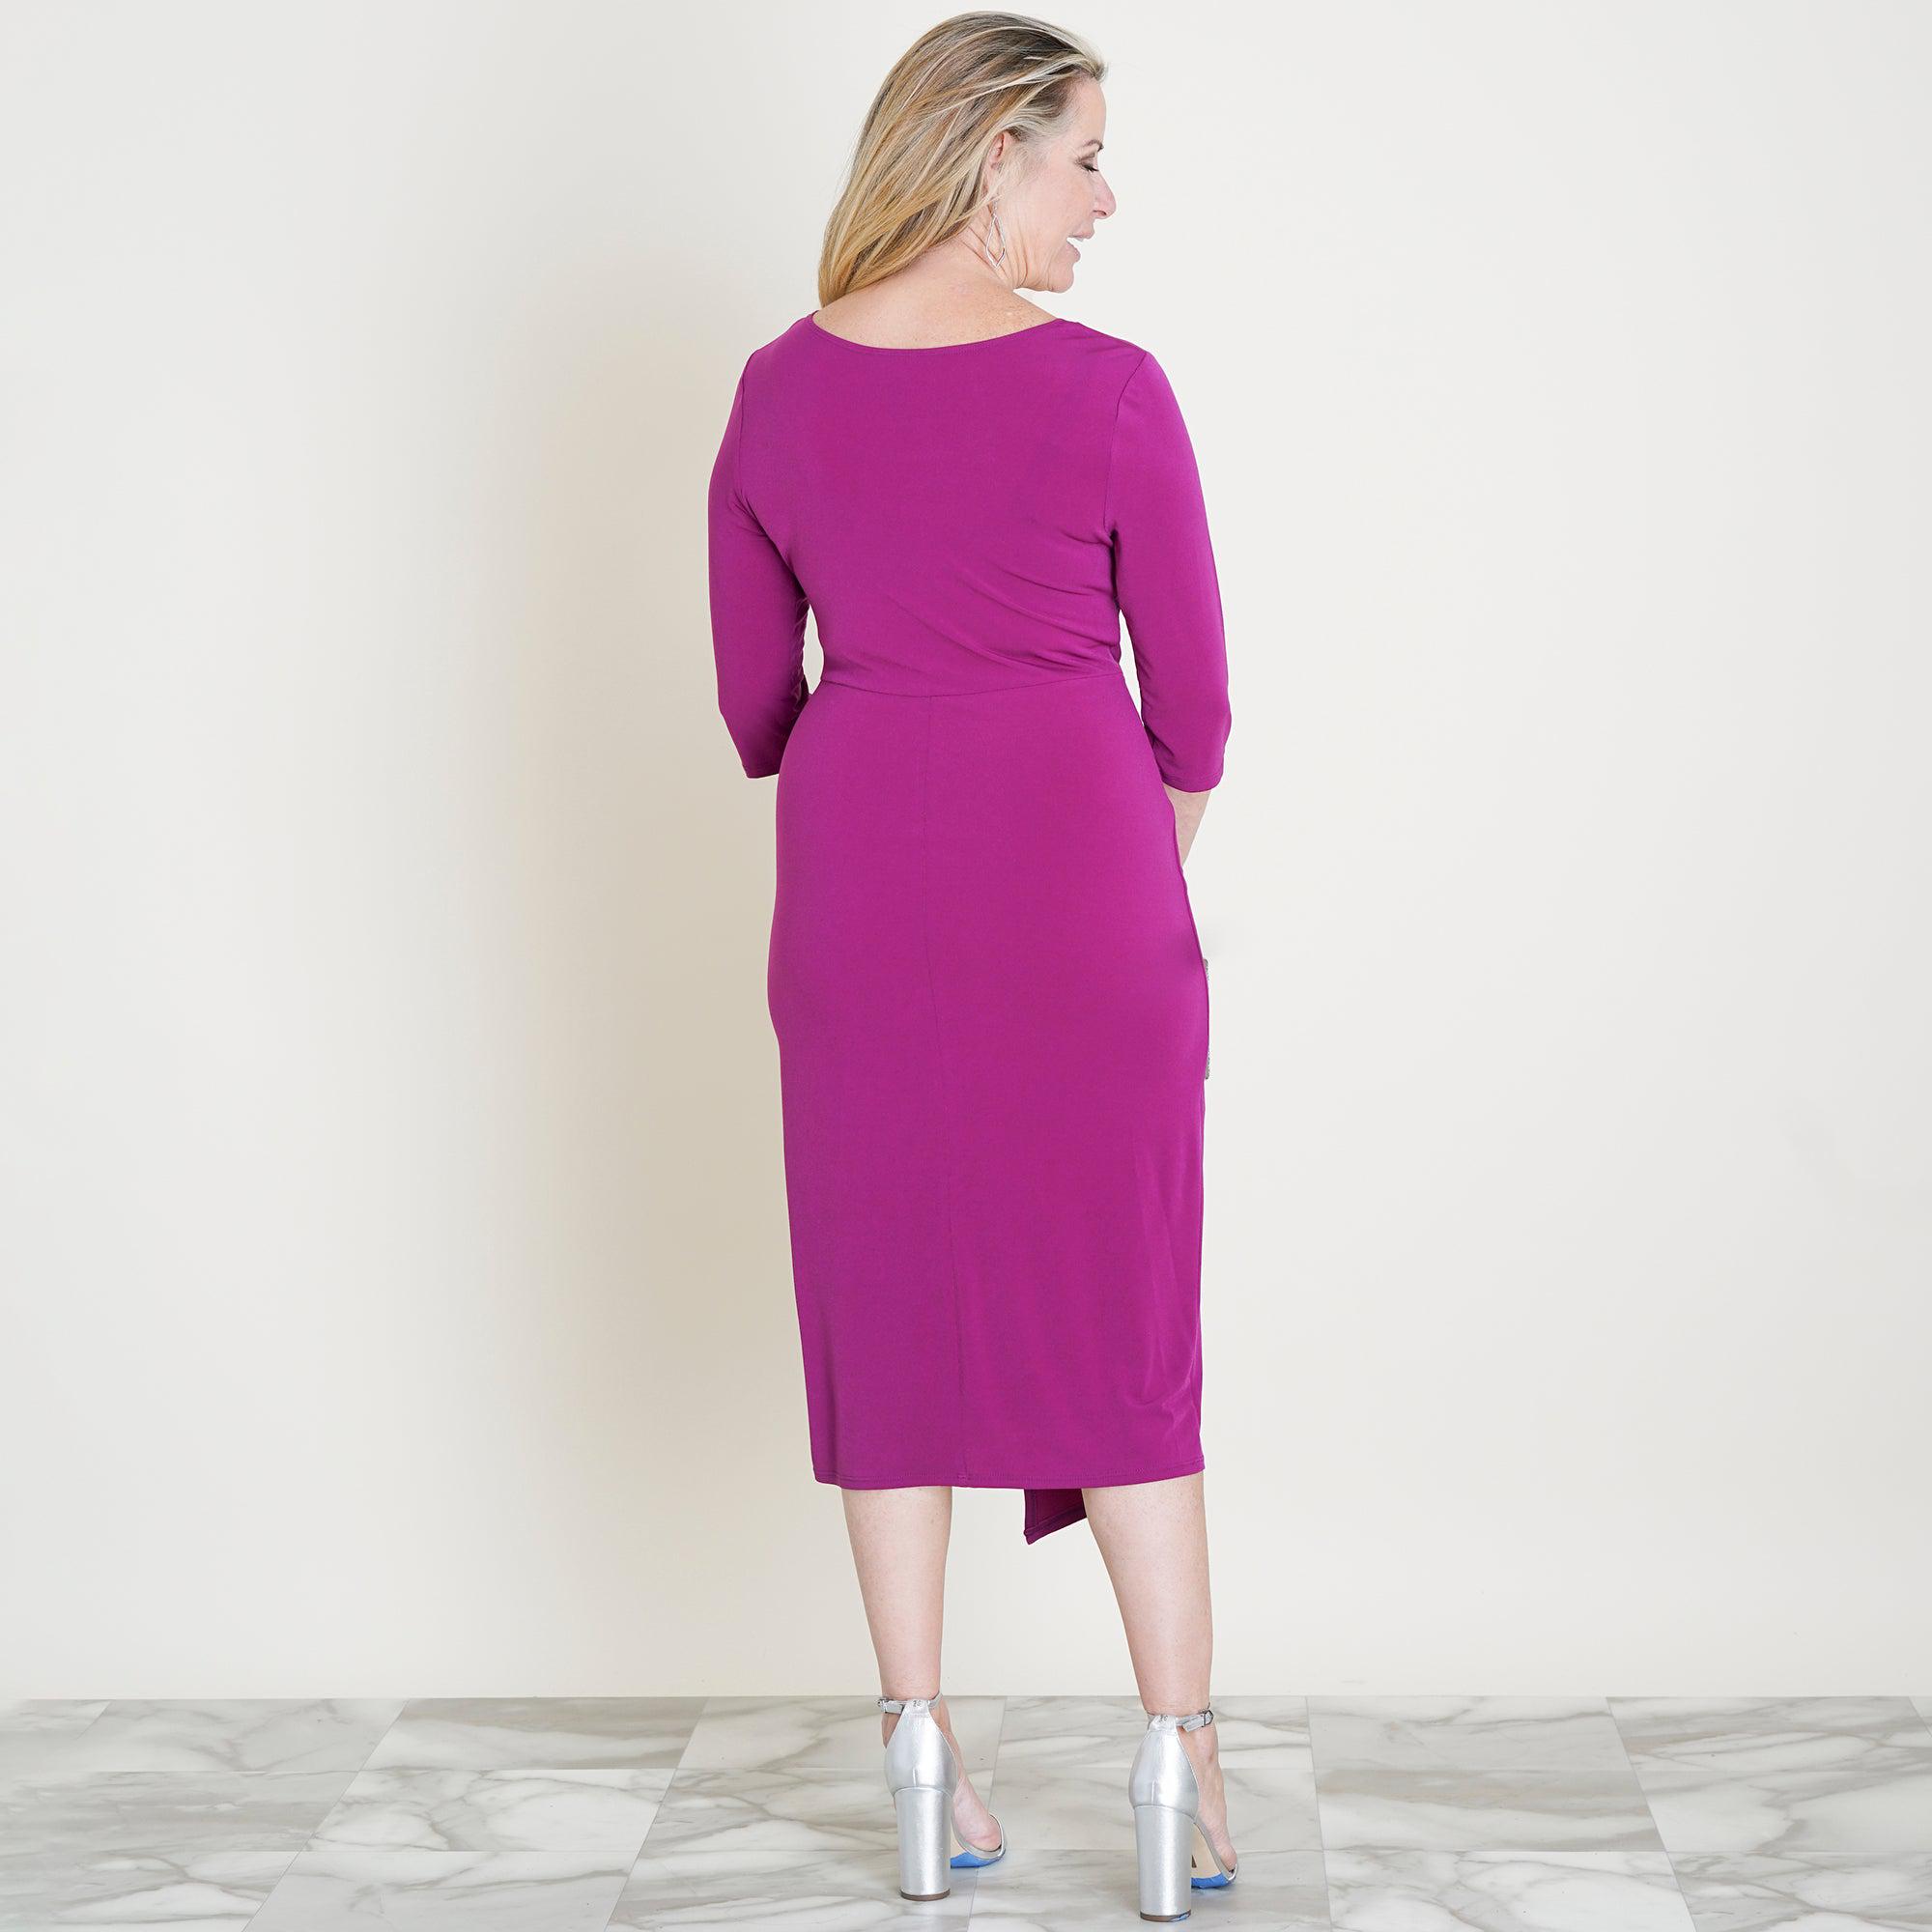 Woman posing wearing Magenta Selena Magenta Knot Dress from Connected Apparel